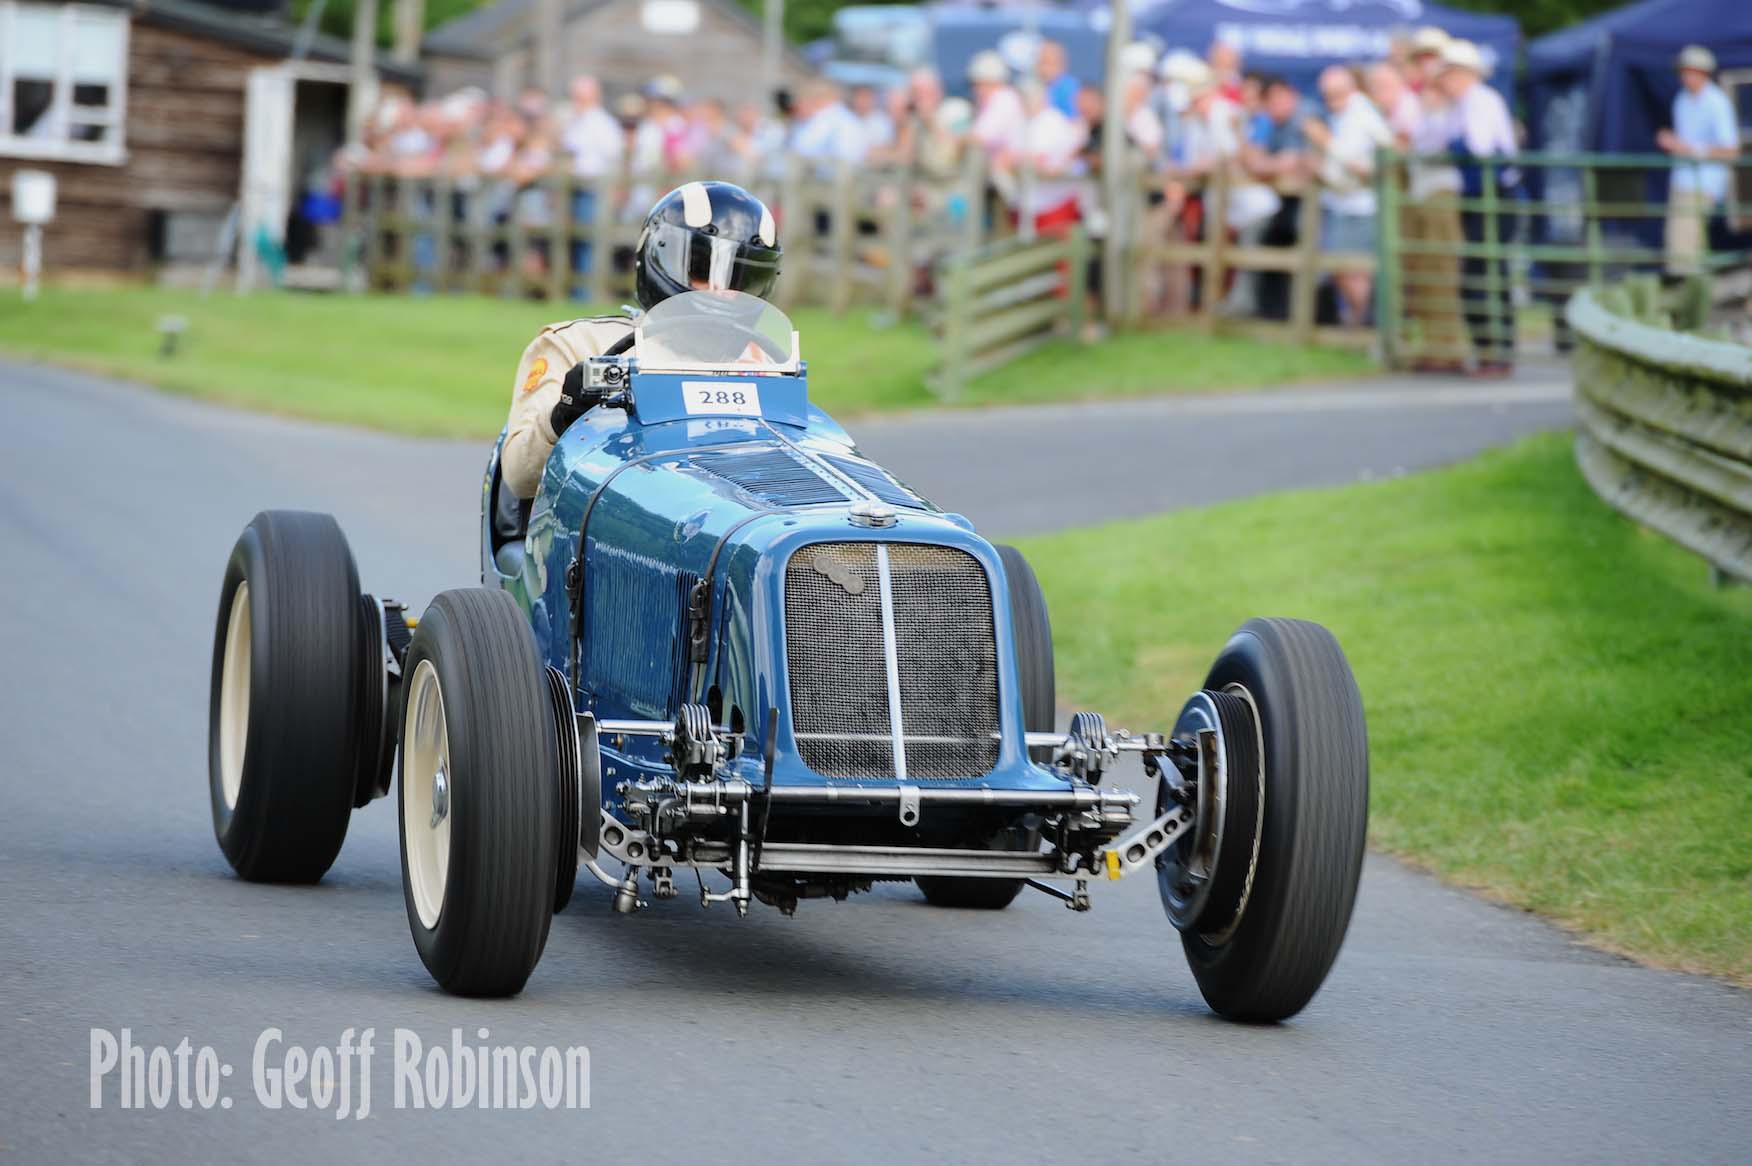 The pinnacle of the Vintage Motorsport Season is here with the VSCC Prescott Hill Climb this weekend cover